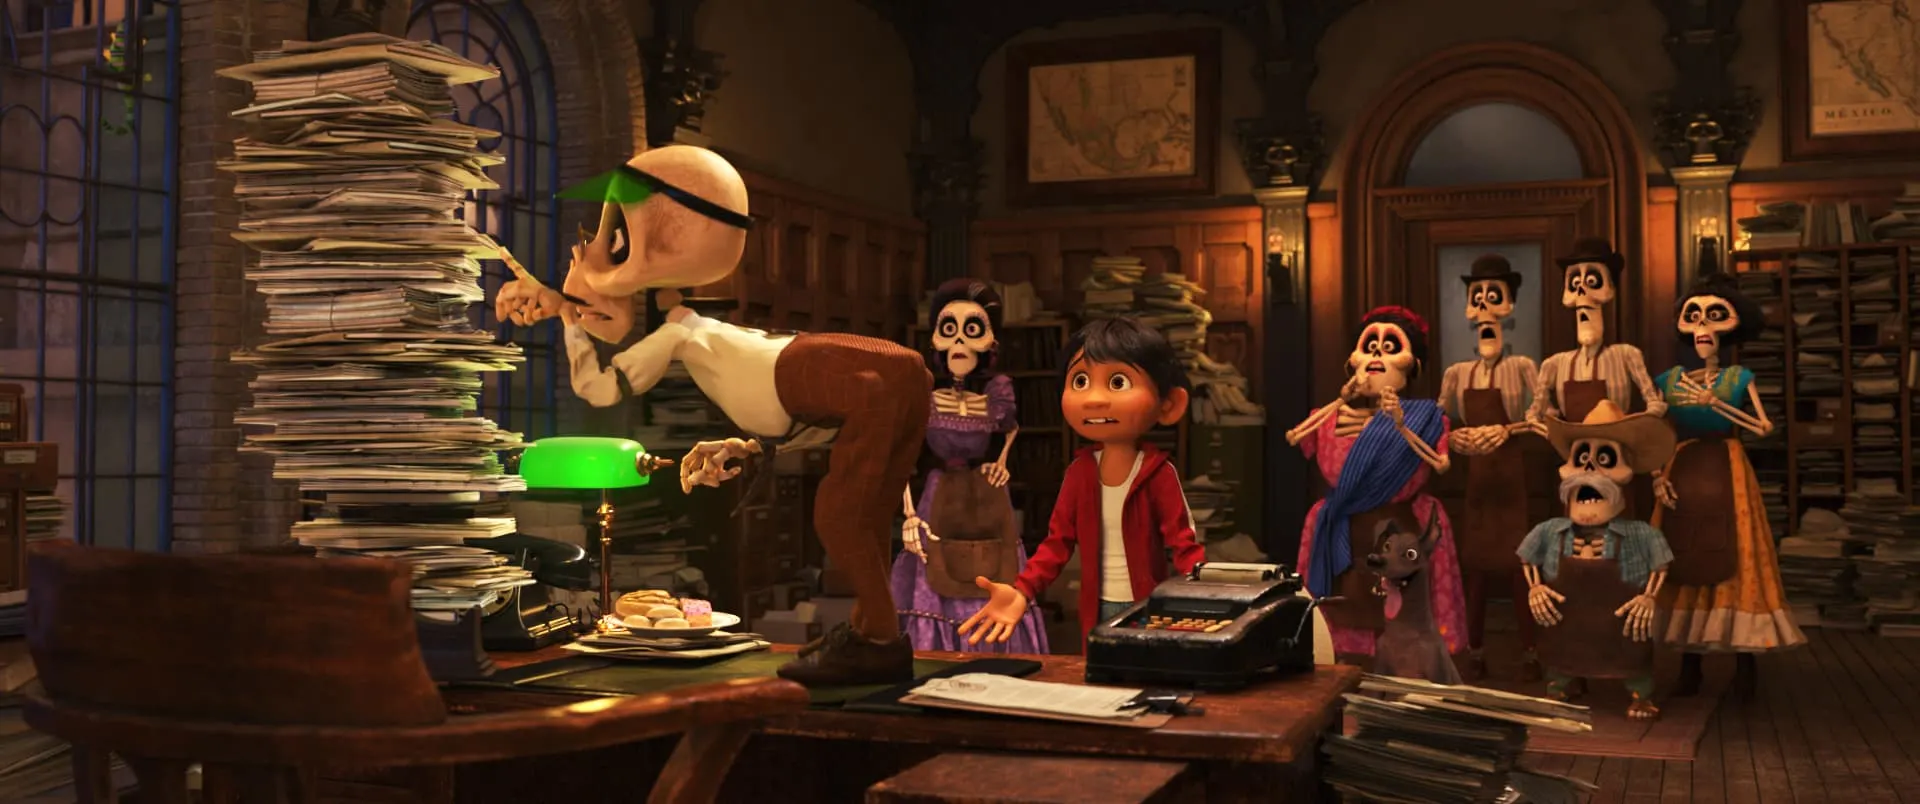 11 Things to Watch for in Pixar's Coco! #PixarCocoEvent